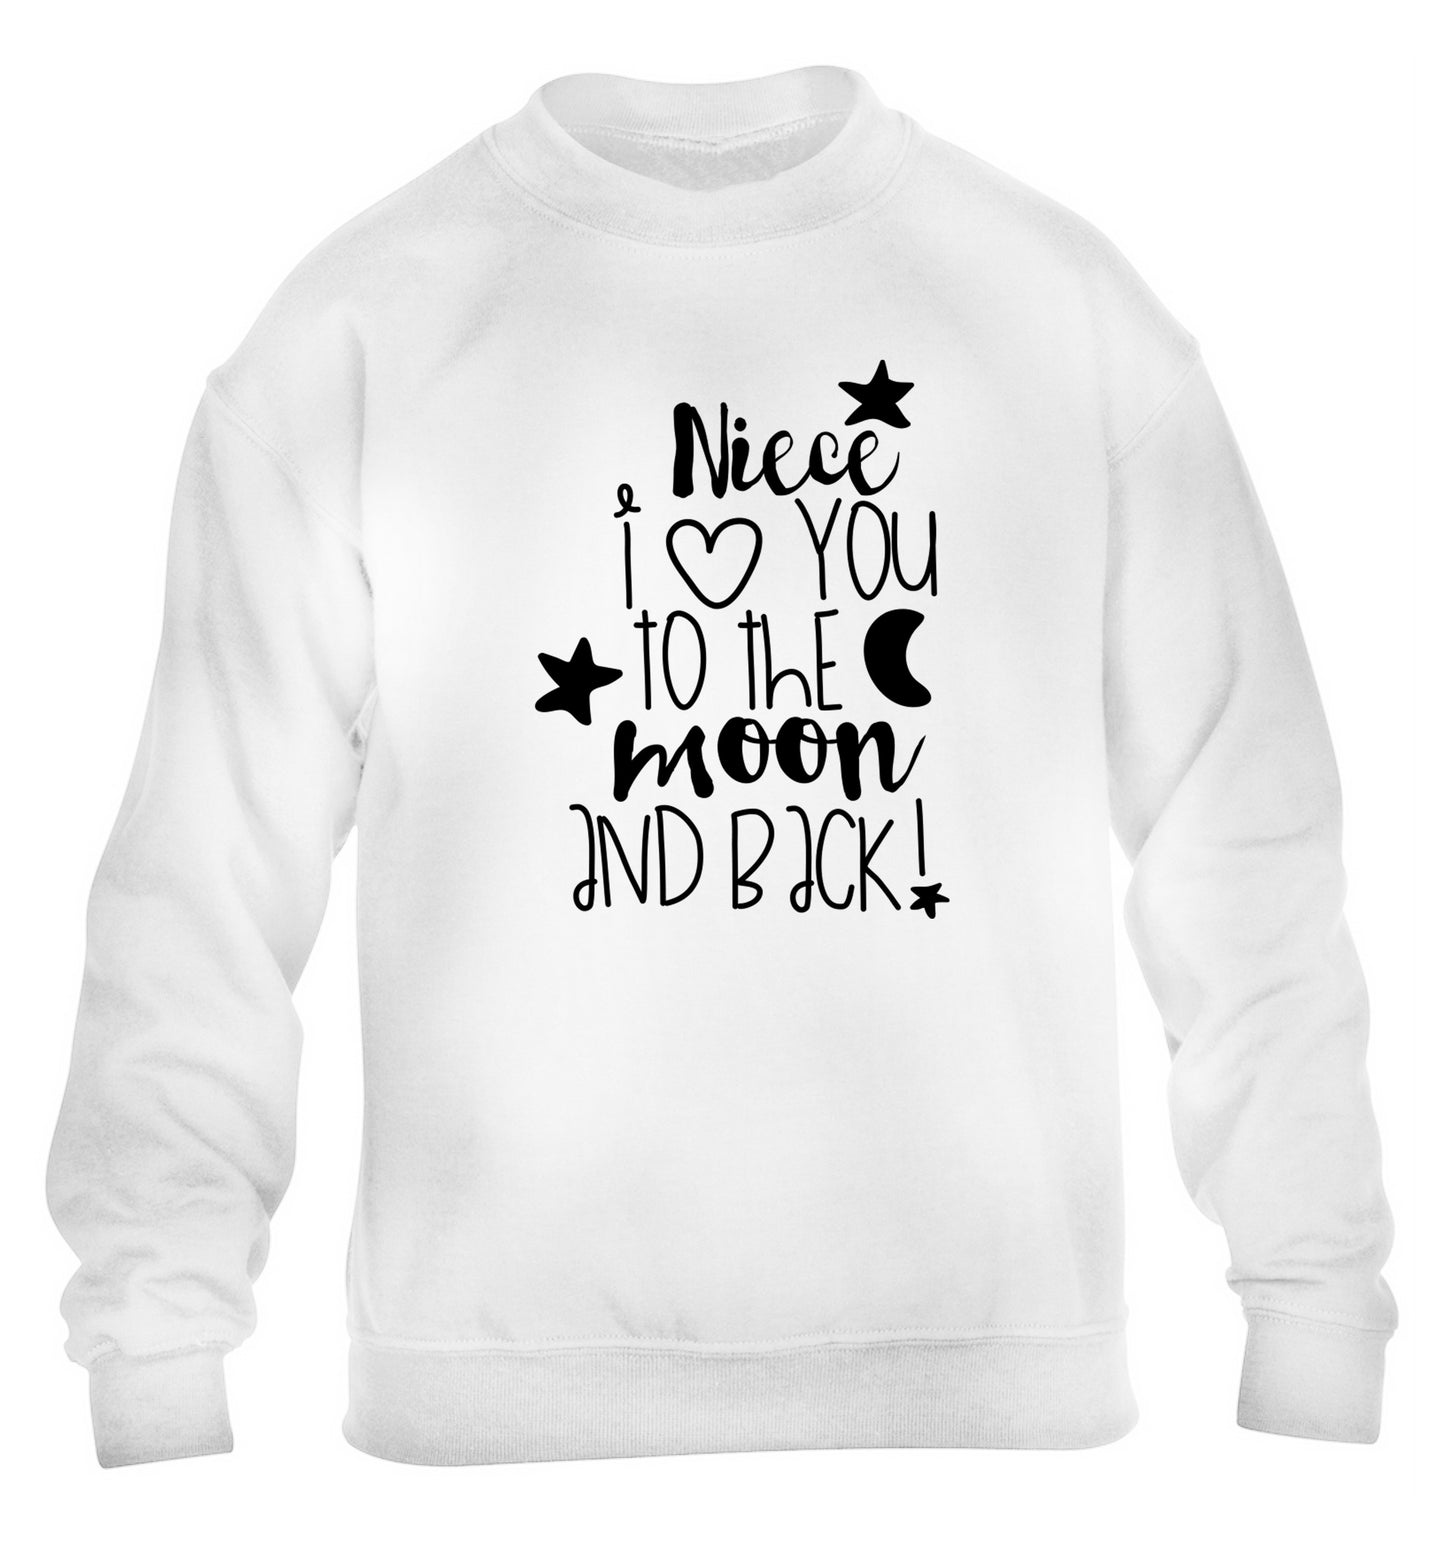 Niece I love you to the moon and back children's white  sweater 12-14 Years